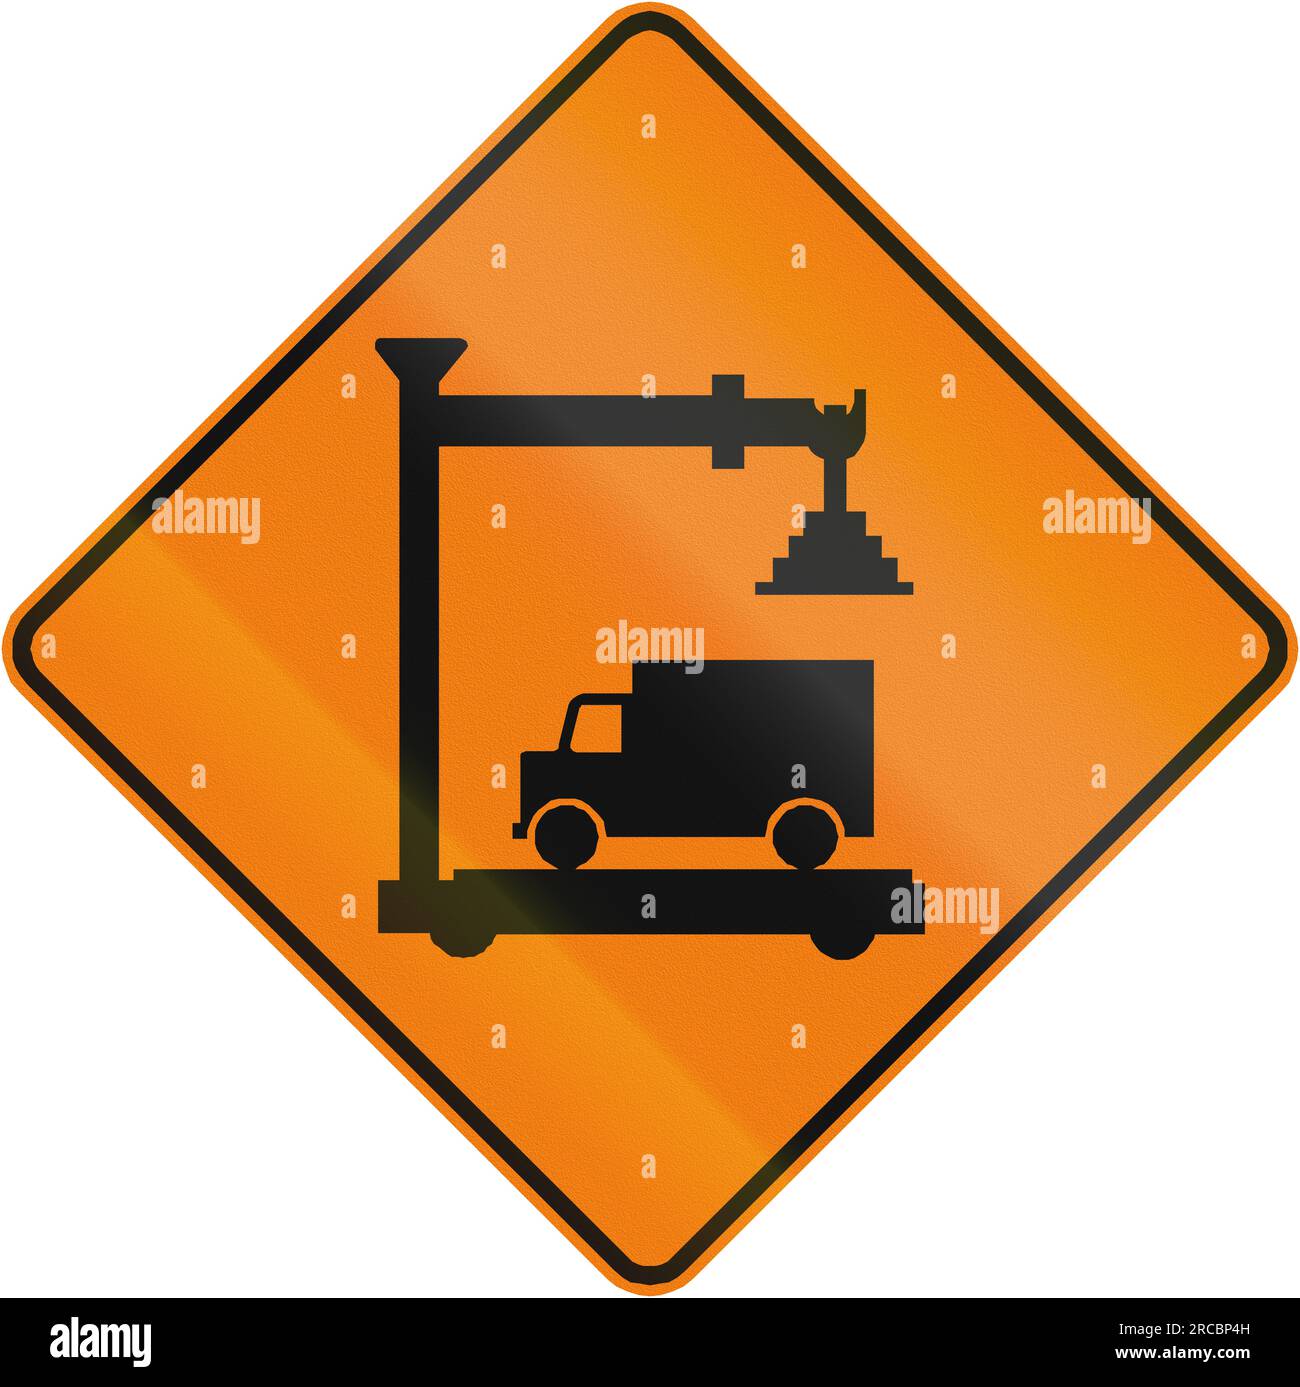 https://c8.alamy.com/comp/2RCBP4H/temporaryworks-road-sign-in-quebec-canada-weigh-station-ahead-2RCBP4H.jpg